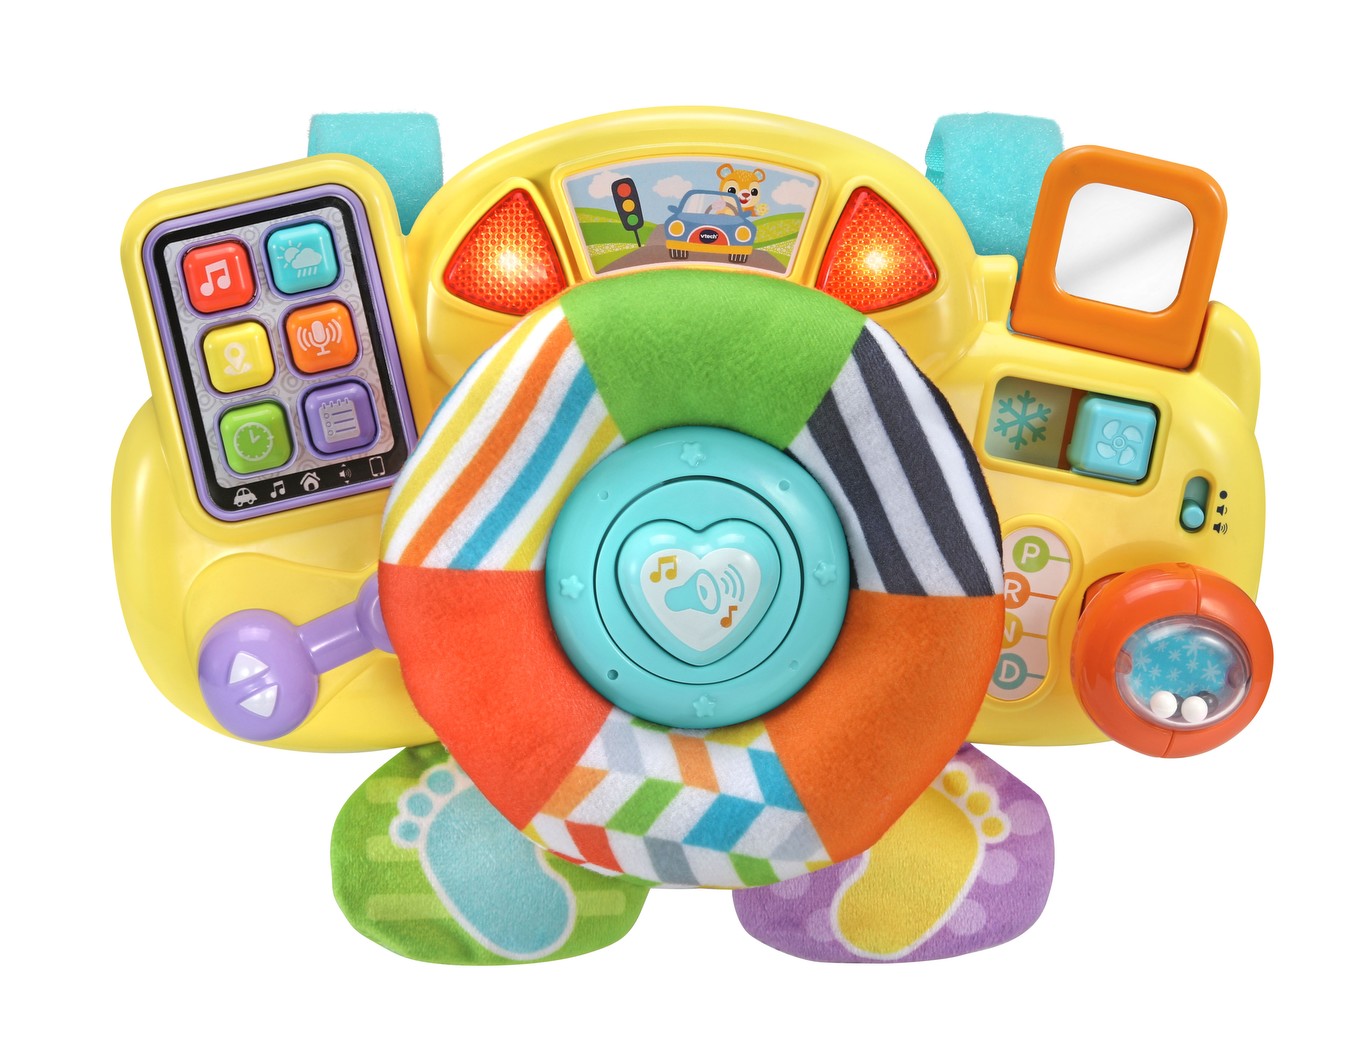 https://www.vtechkids.com/assets/data/products/%7B991BC34E-6749-4217-96D8-4CCC10BAAECD%7D/images/80-567500-Main_large.jpg